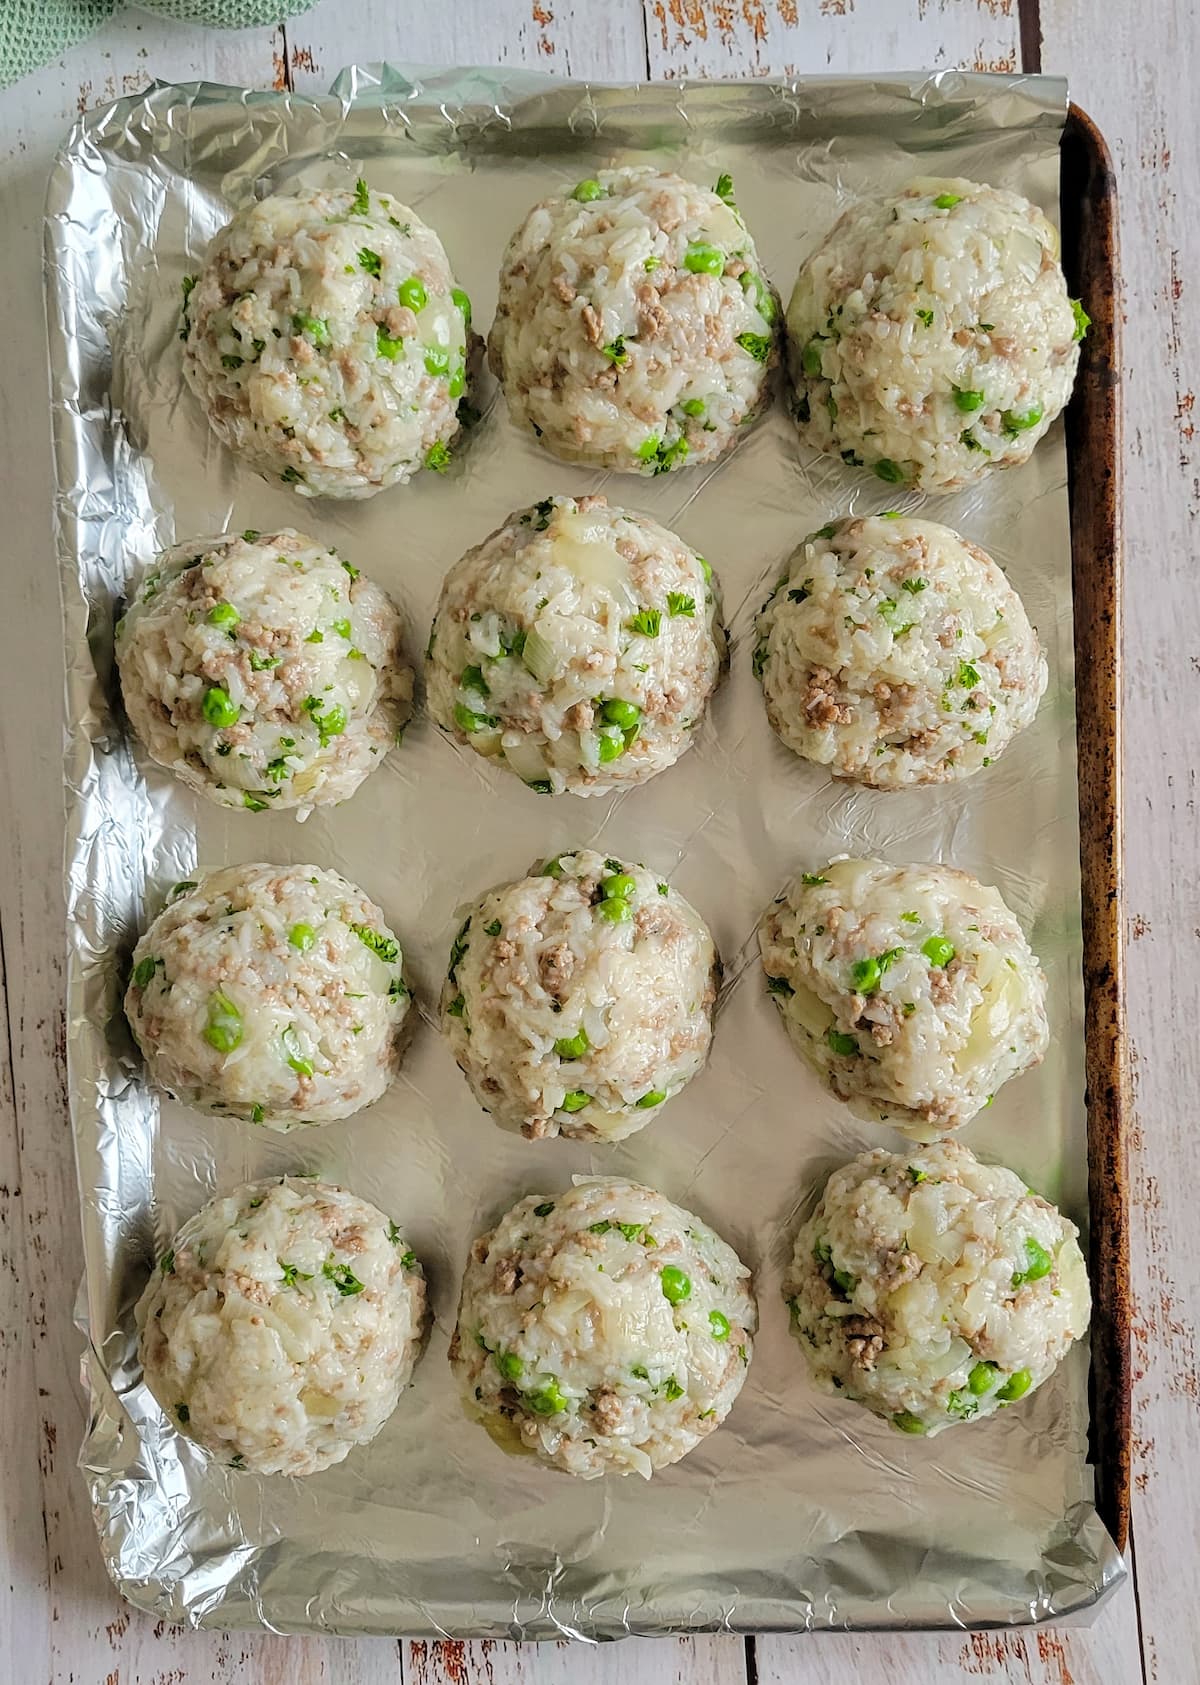 unbreaded rice balls with peas and ground beef on a foil lined baking sheet